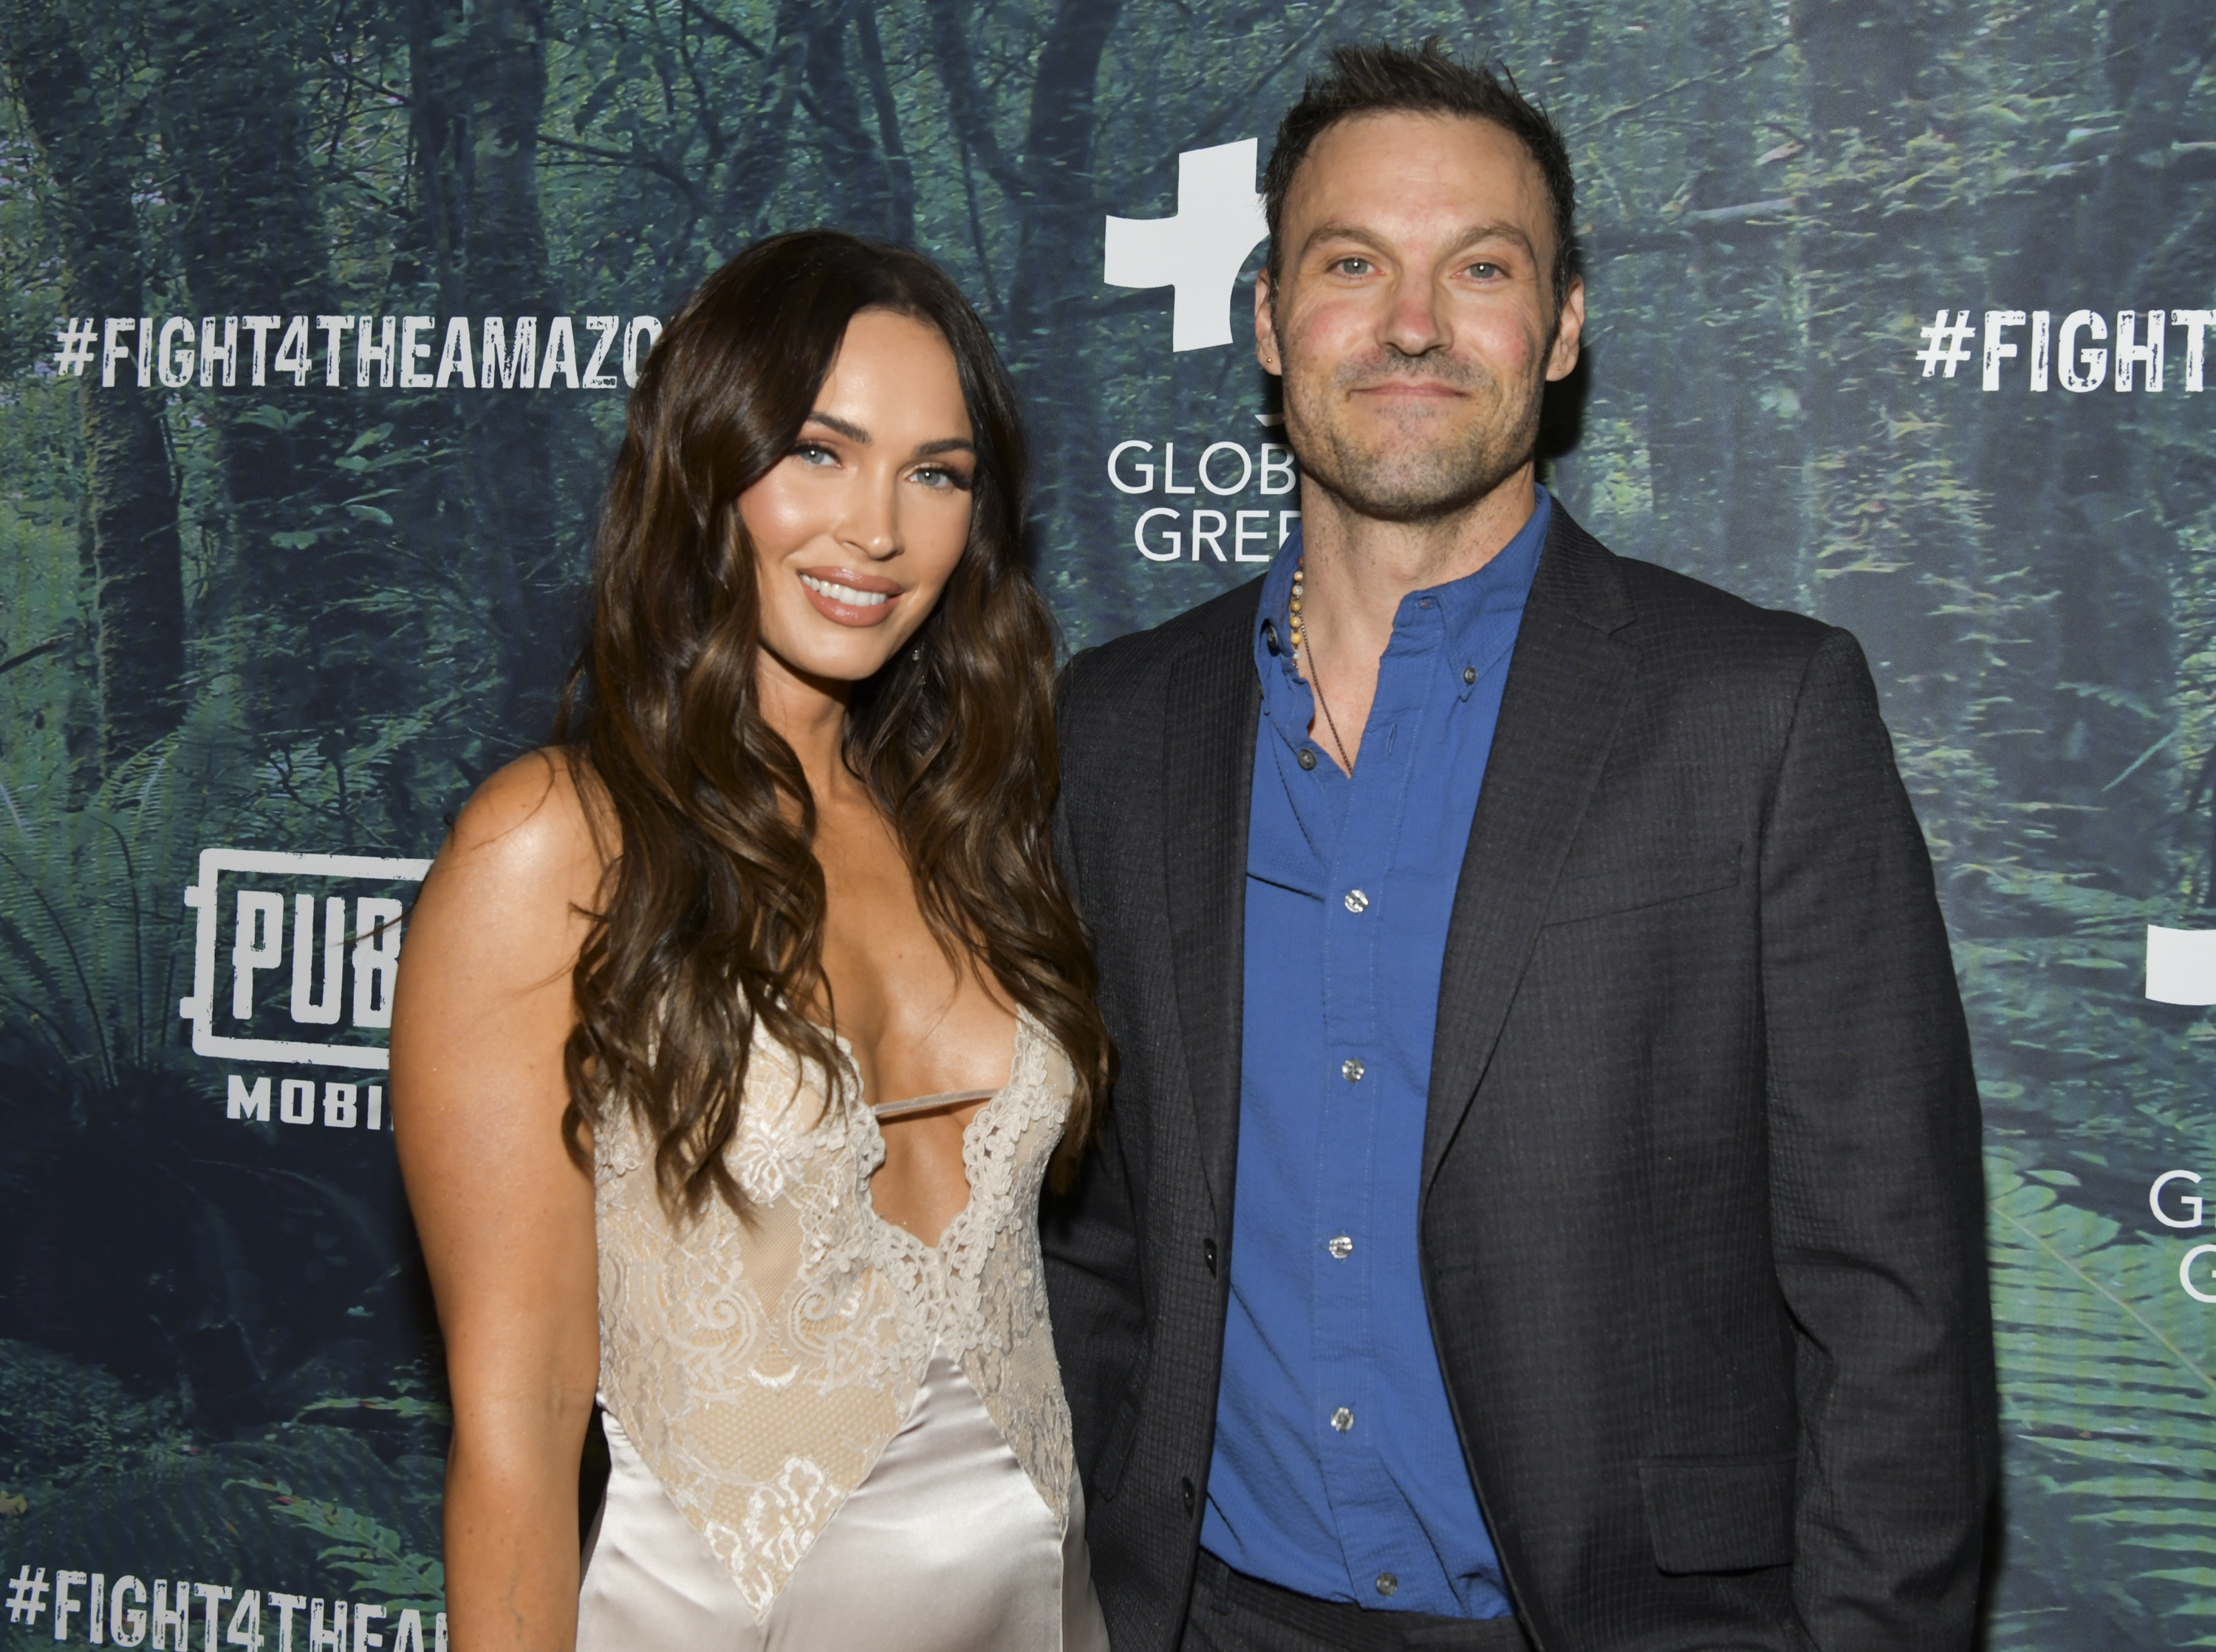 Megan Fox and Brian Austin Green attending a PUBG Mobile's event in Avalon Hollywood, Los Angeles, California, December 09, 2019 | Source: Getty Images